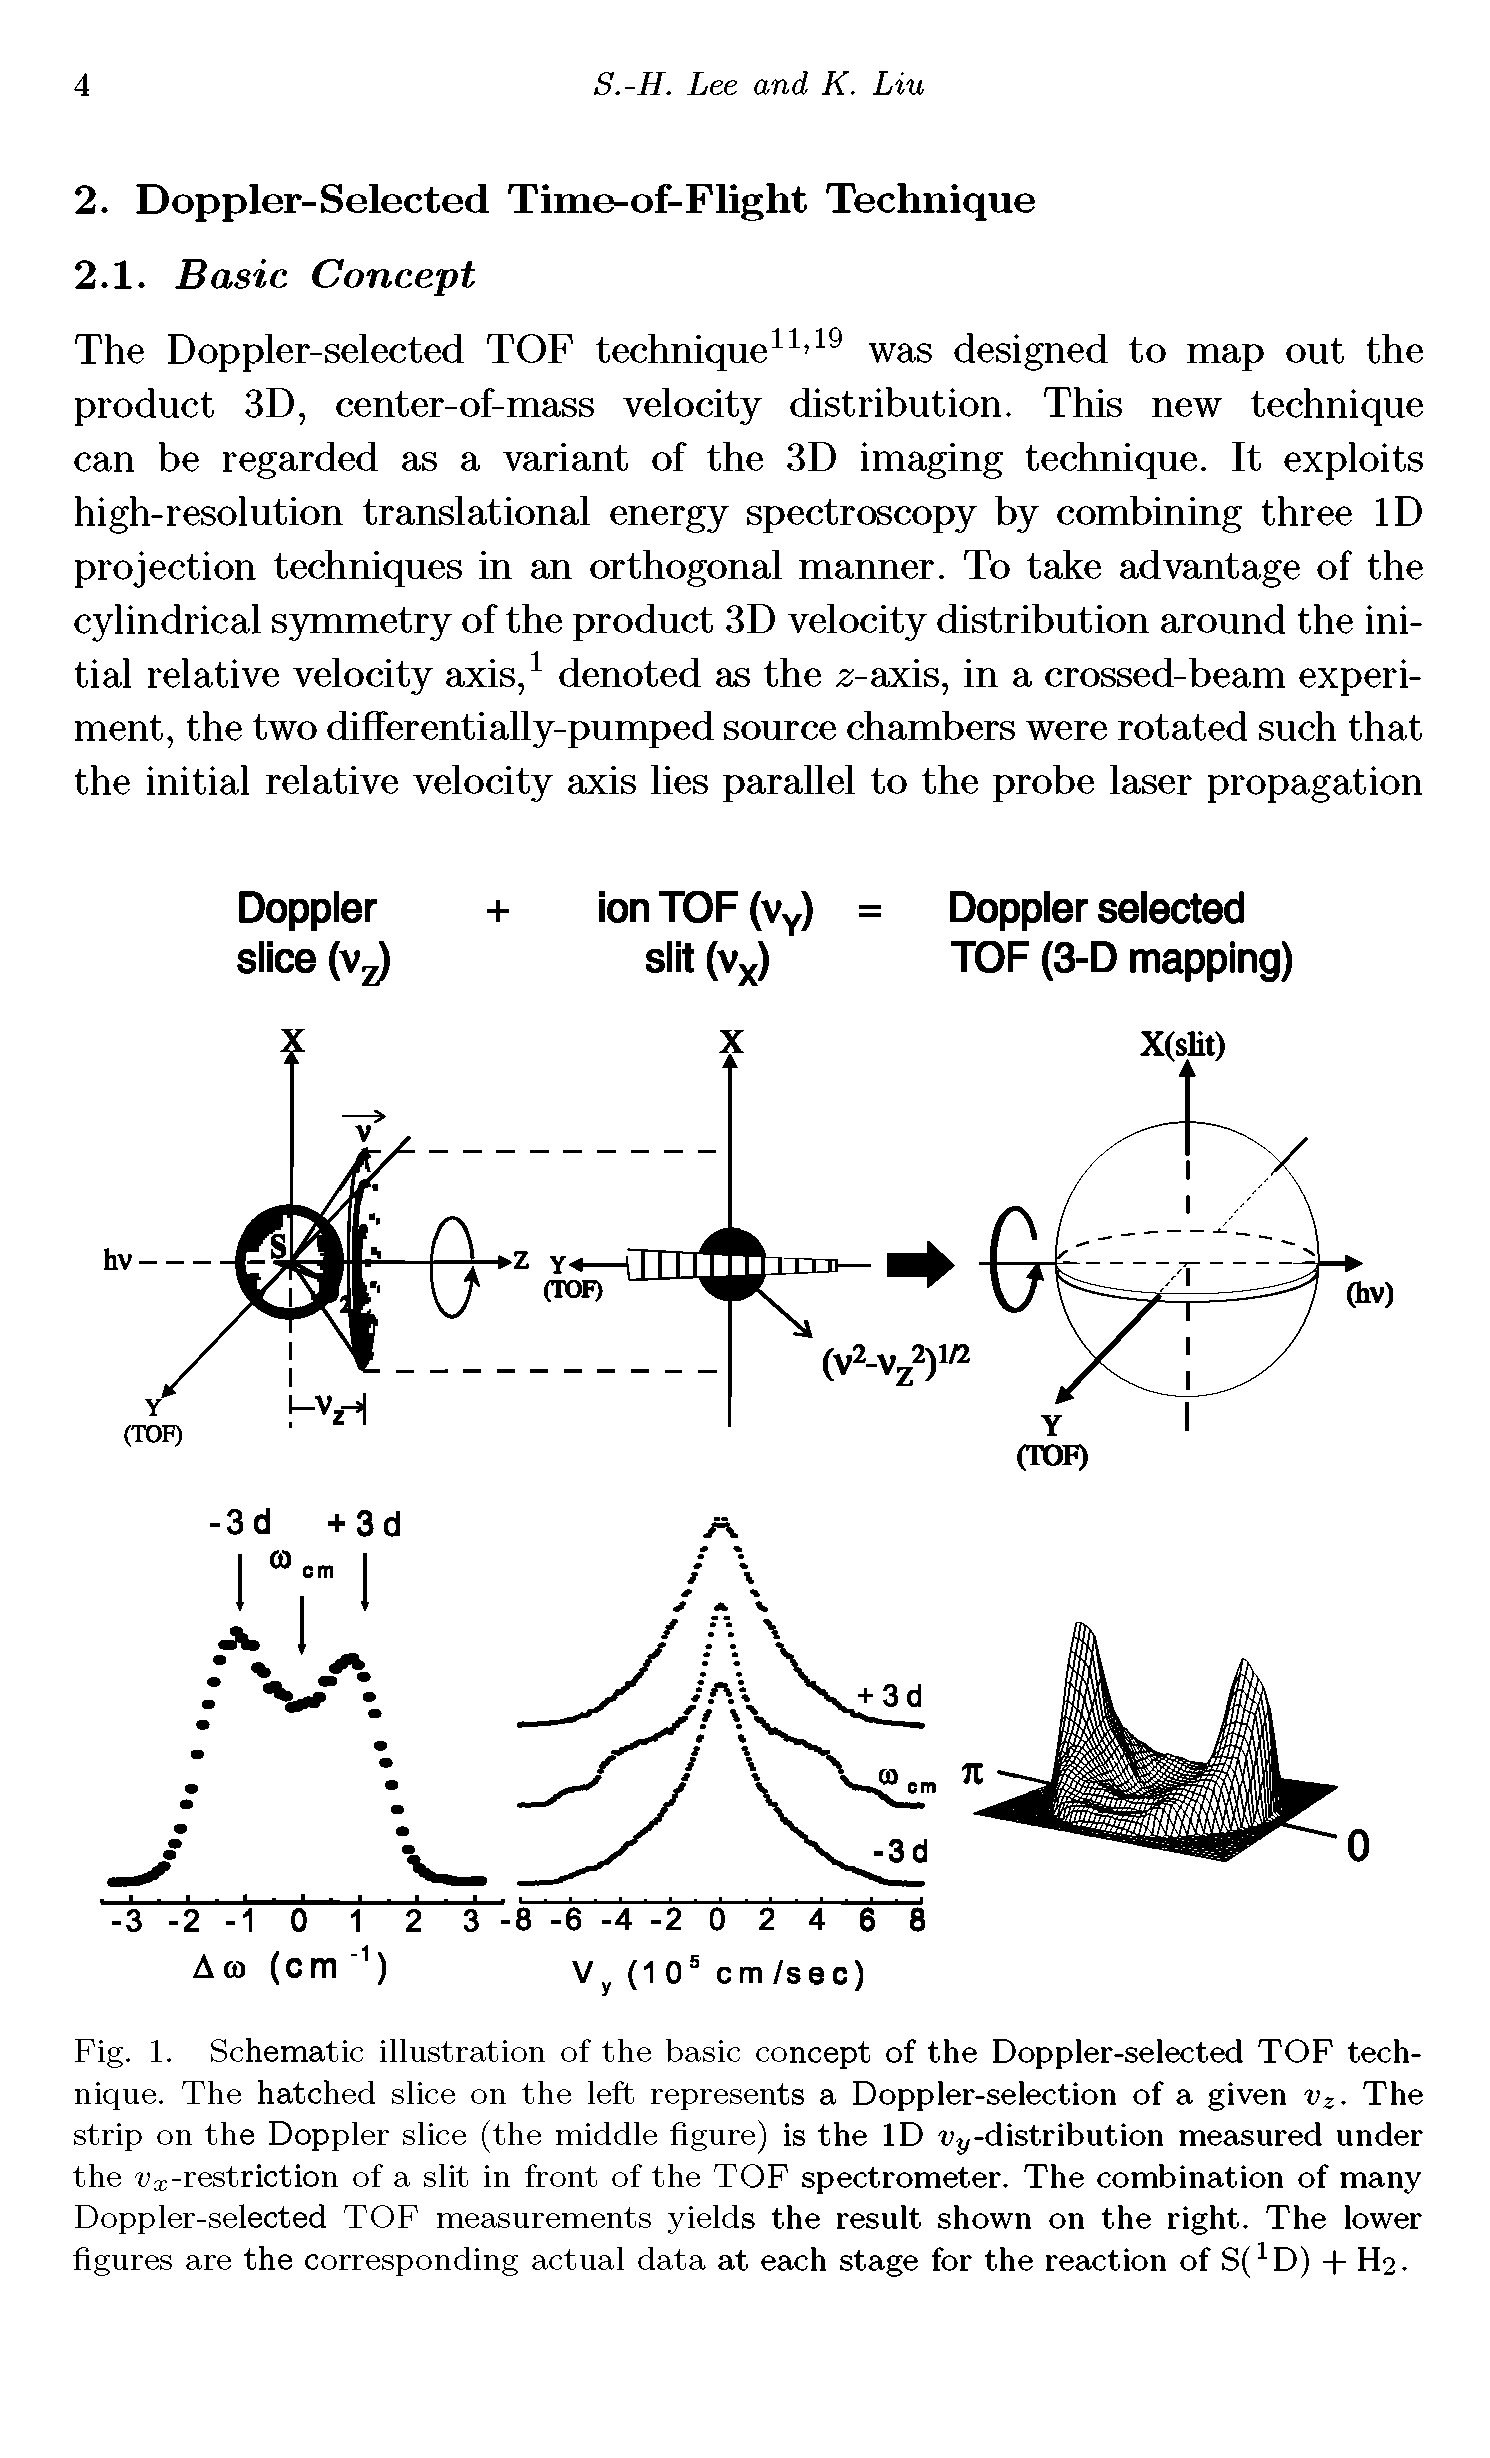 Fig. 1. Schematic illustration of the basic concept of the Doppler-selected TOF technique. The hatched slice on the left represents a Doppler-selection of a given vz- The strip on the Doppler slice (the middle figure) is the ID Vy-distribution measured under the -restriction of a slit in front of the TOF spectrometer. The combination of many Doppler-selected TOF measurements yields the result shown on the right. The lower figures are the corresponding actual data at each stage for the reaction of S(1D) + H2.